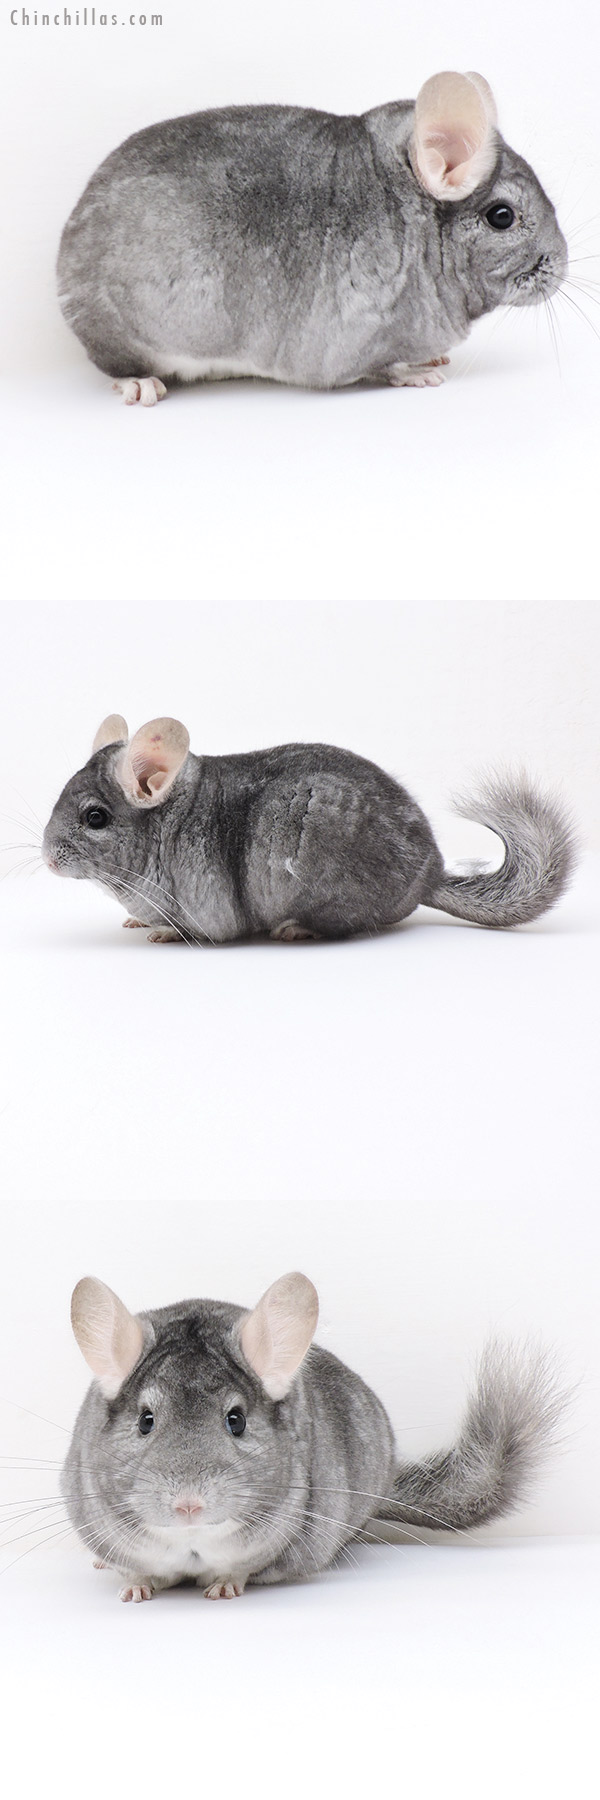 Chinchilla or related item offered for sale or export on Chinchillas.com - 19170 Blocky Premium Production Quality Sapphire ( Violet Carrier ) Female Chinchilla